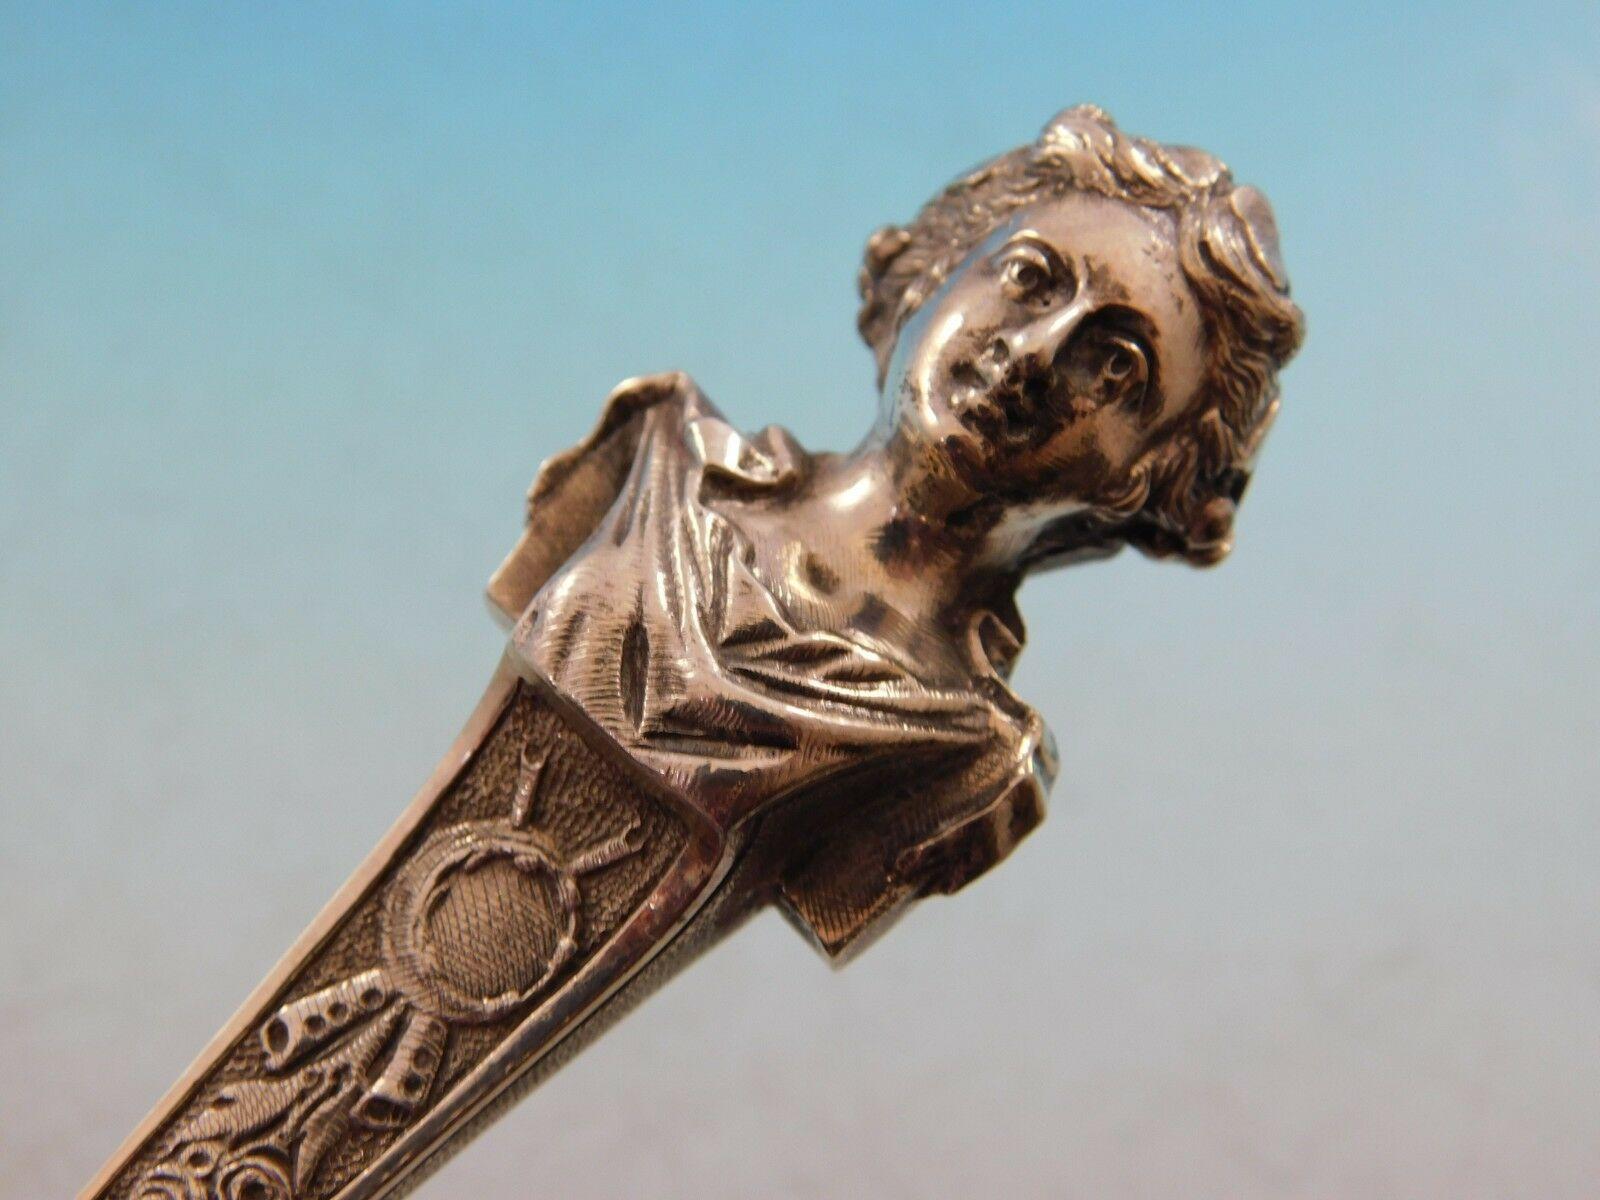 Bust by Gorham

Captivating coin silver buffet fork measuring 11